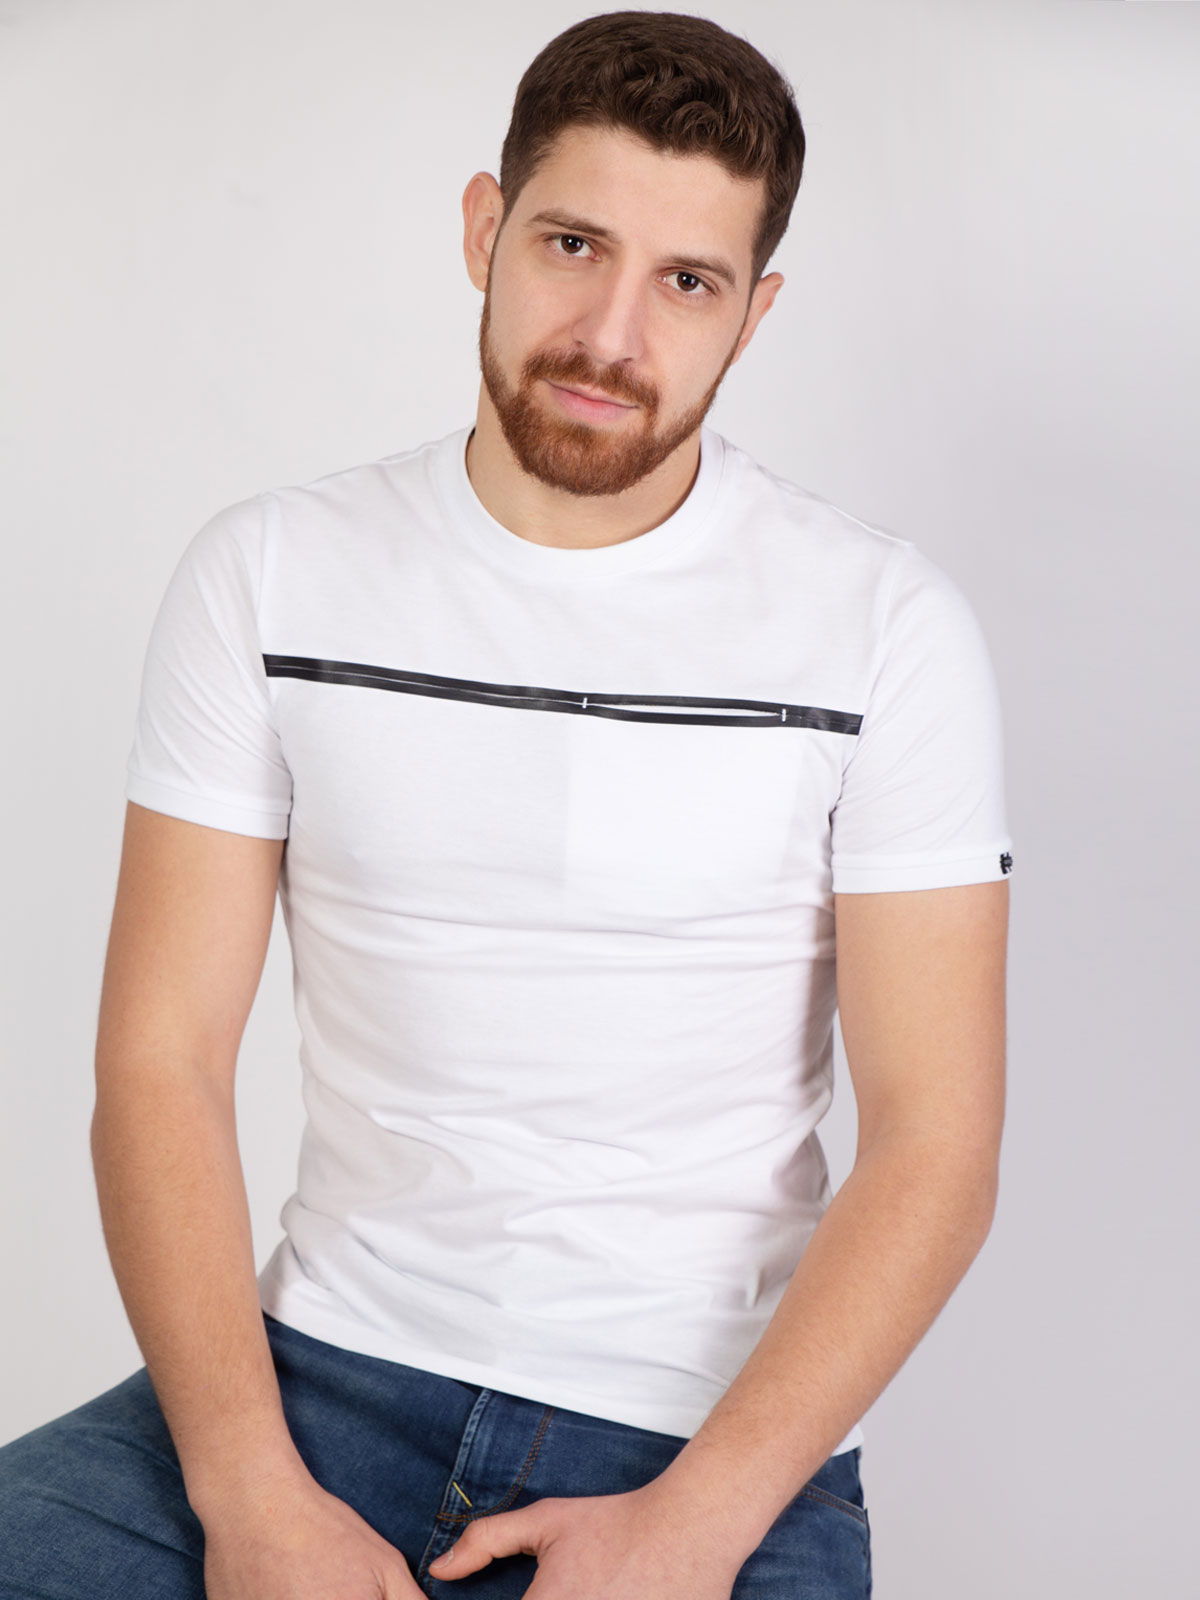 White tshirt with black line on the fro - 96388 € 12.37 img3